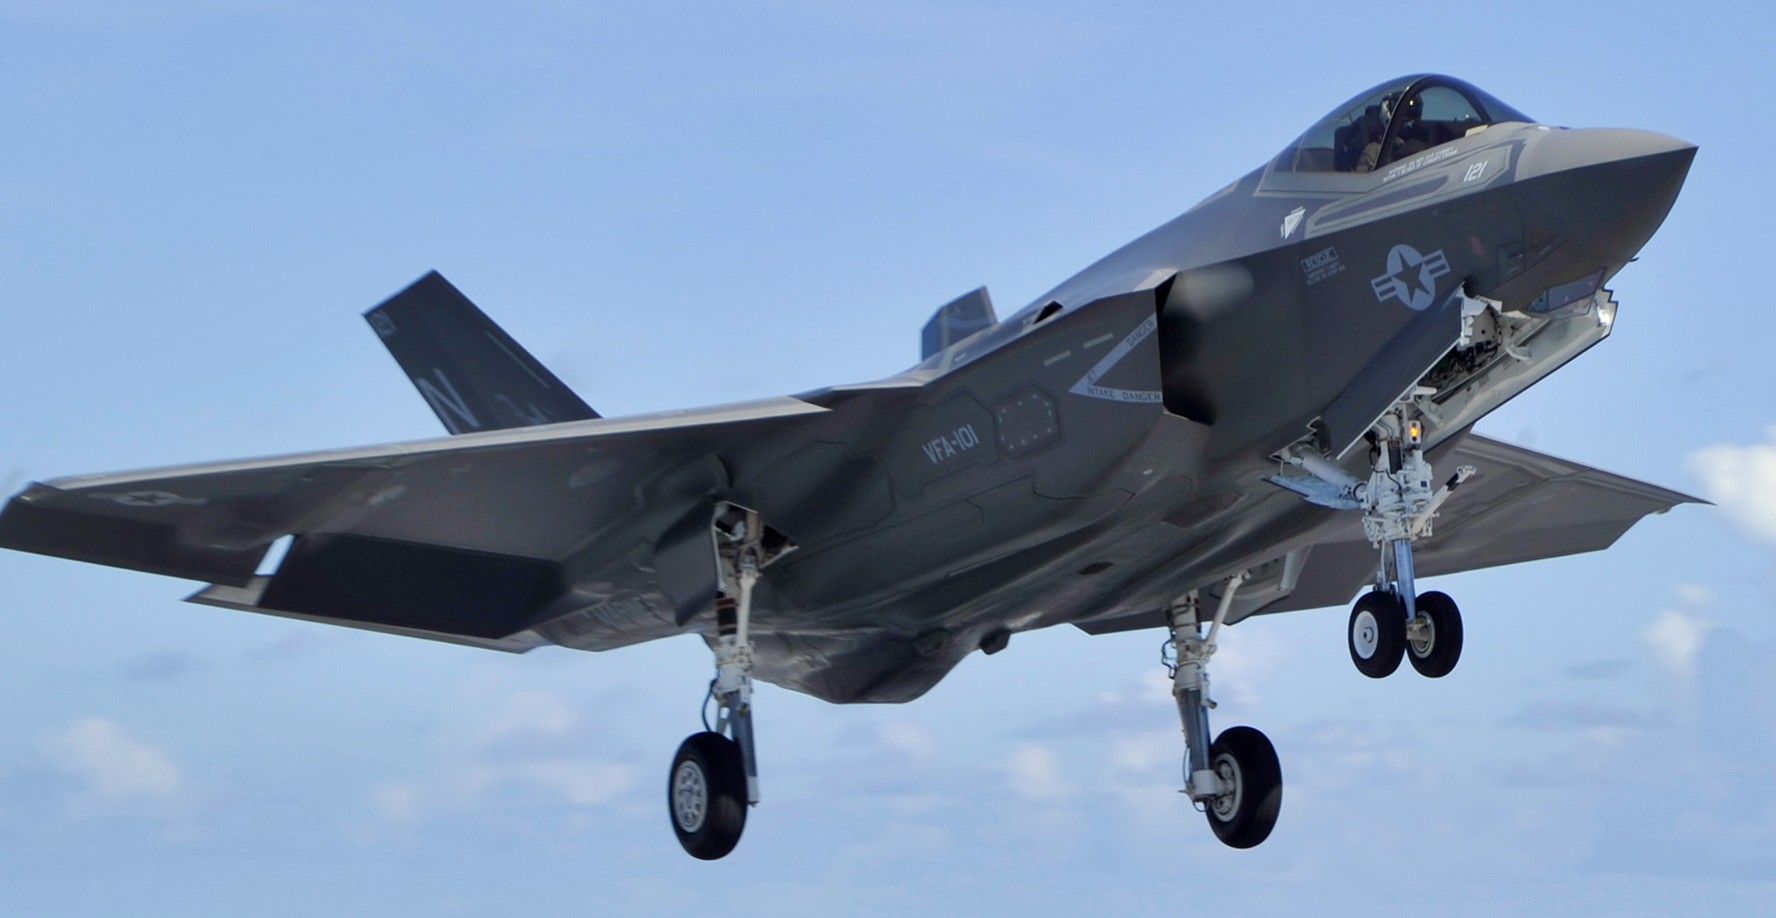 vfa-101 grim reapers strike fighter squadron us navy f-35c lightning jsf frs 45